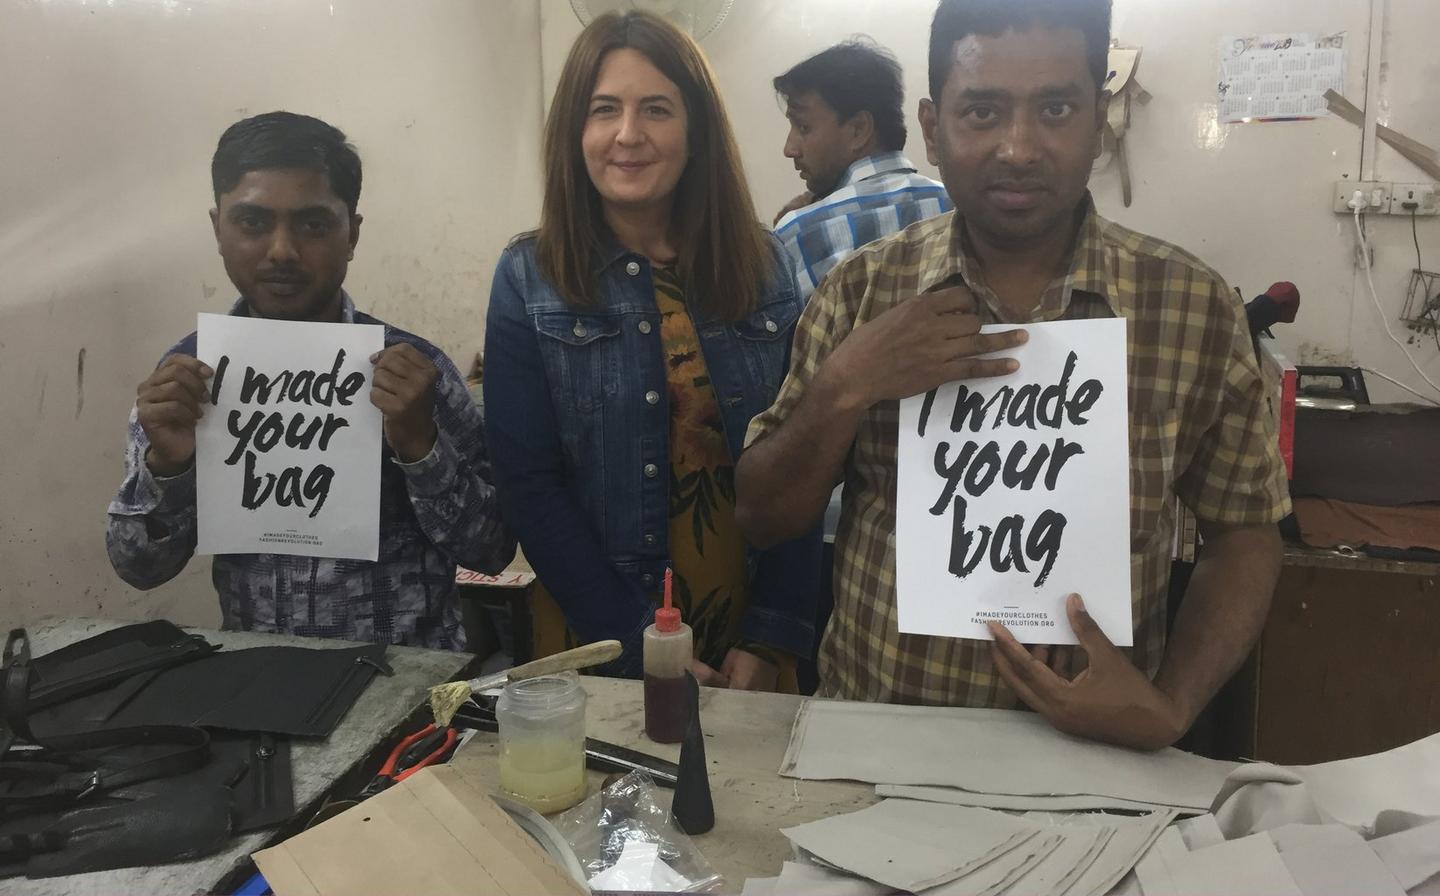 A group of people all holding, I made your bag, signs in a factory.